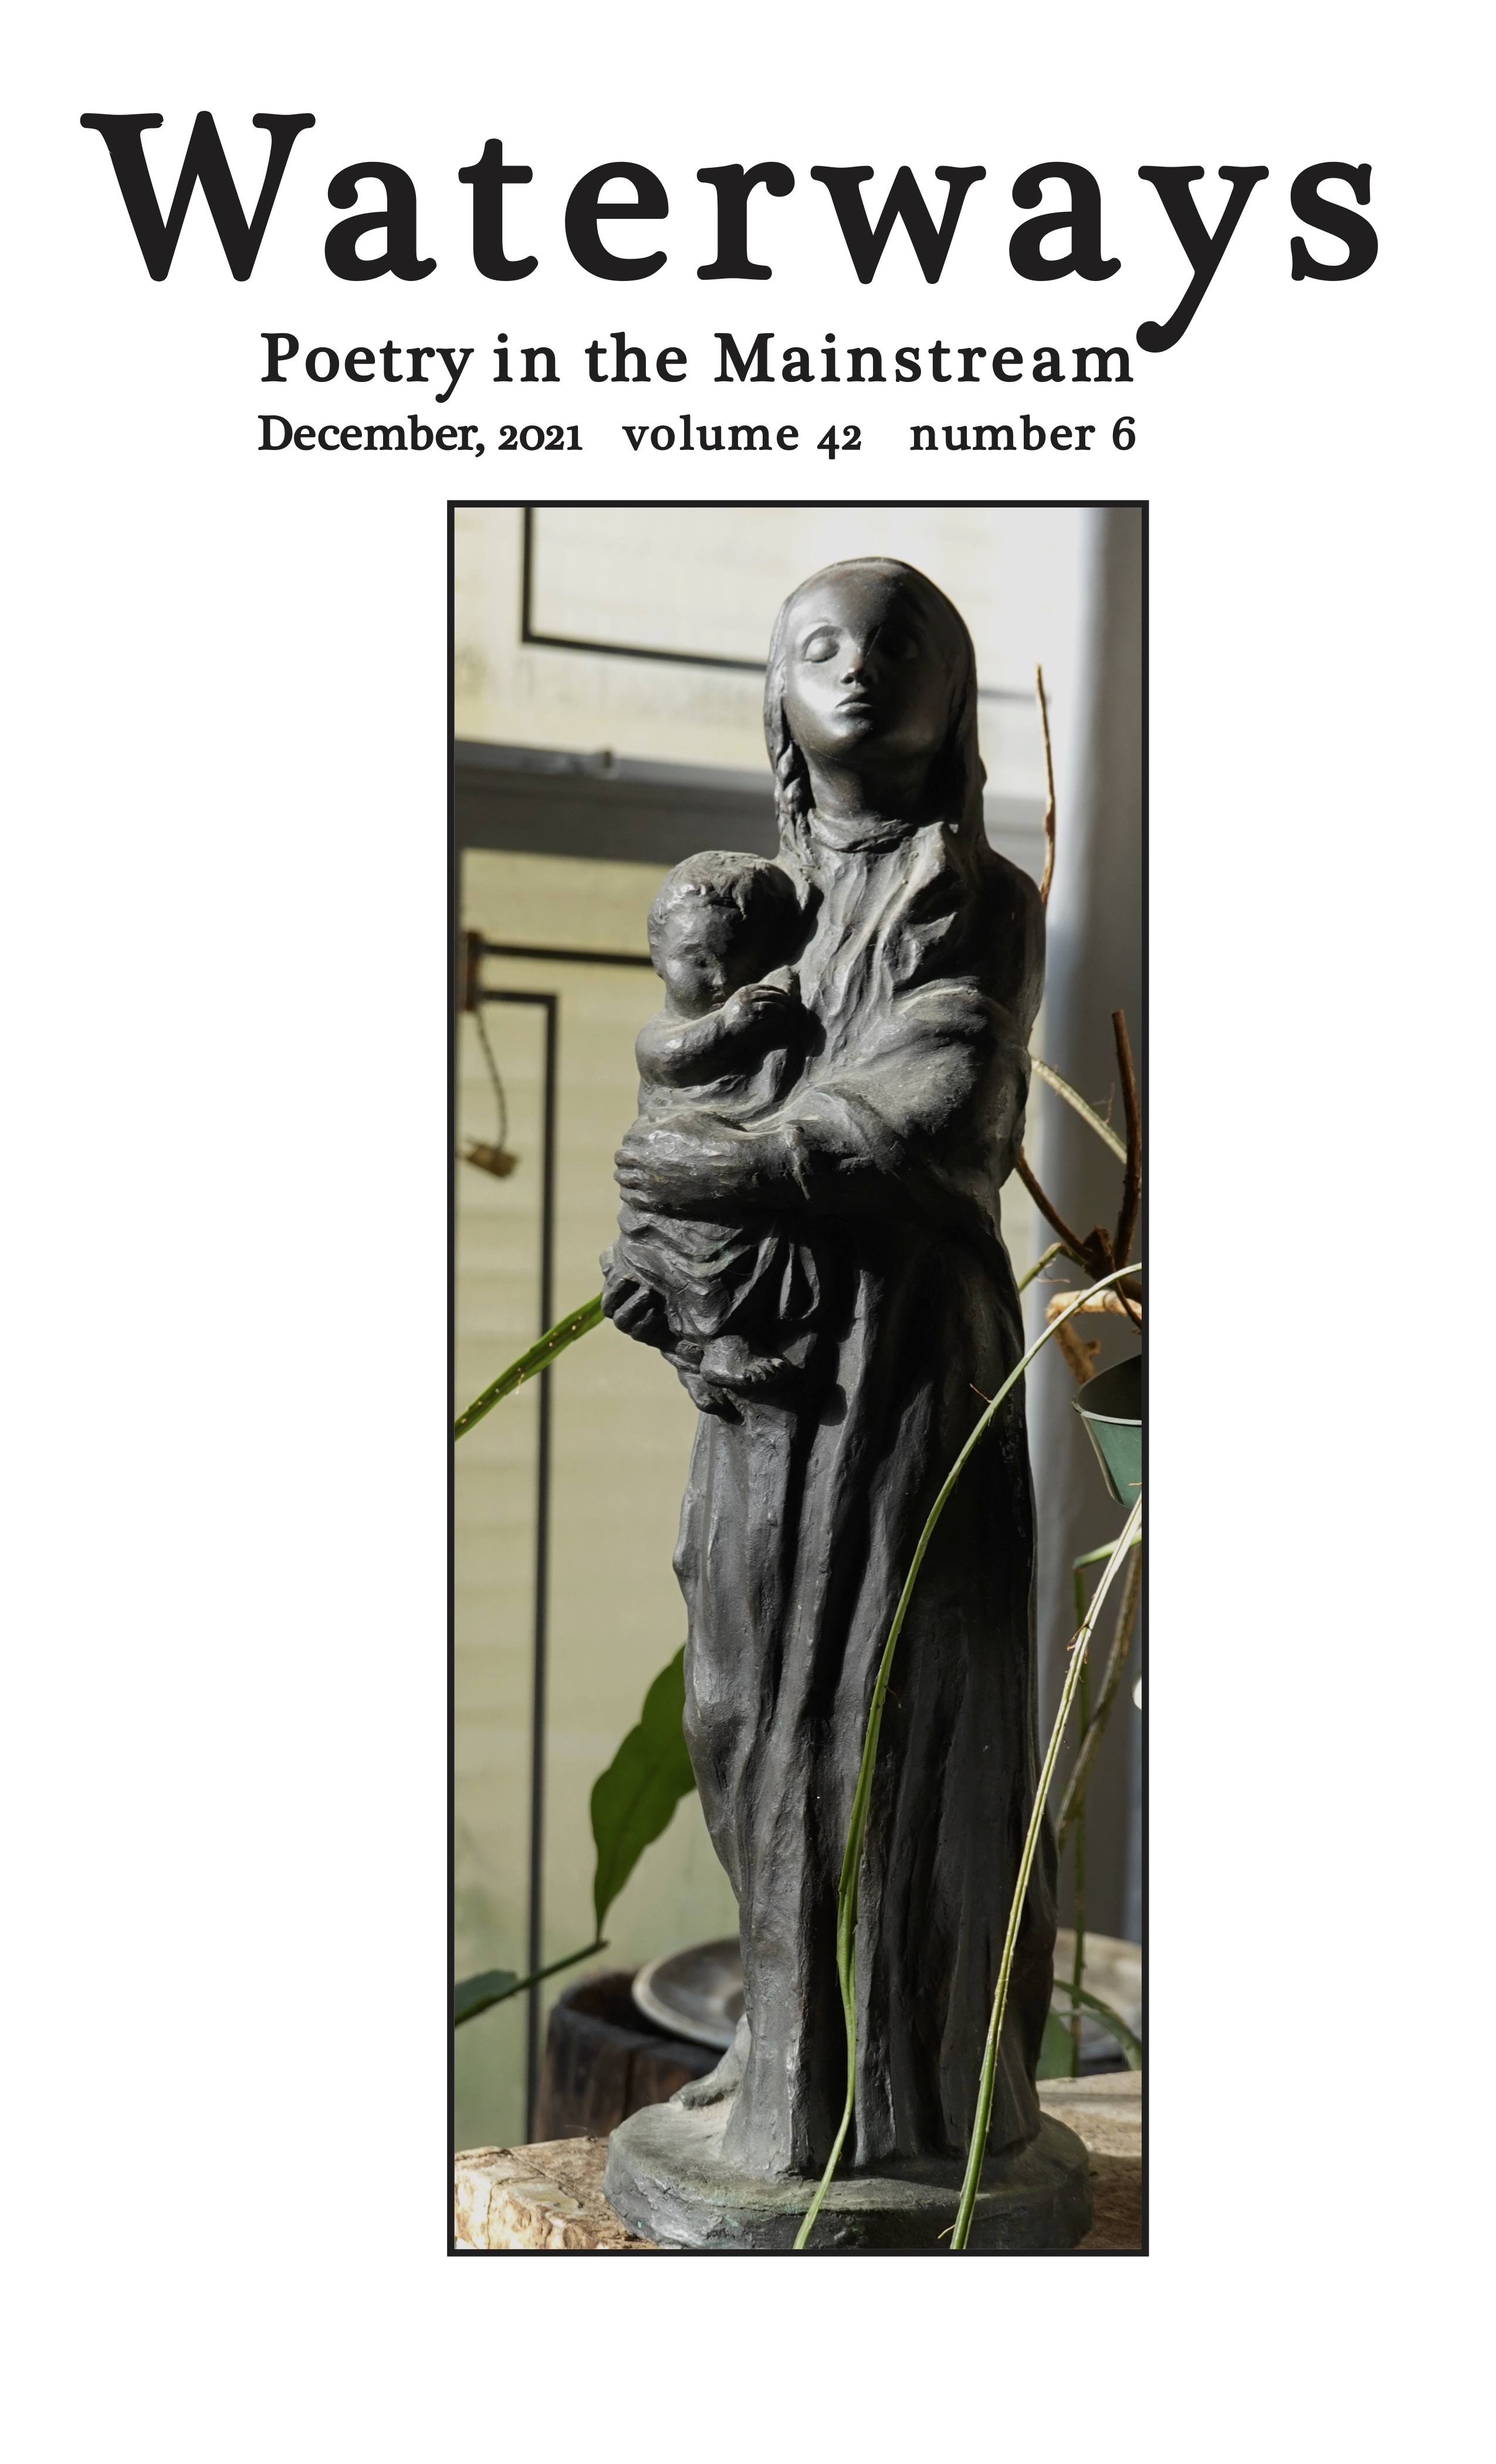 bronze sculpture of a madonna and child is paired with an adoring chinchilla.